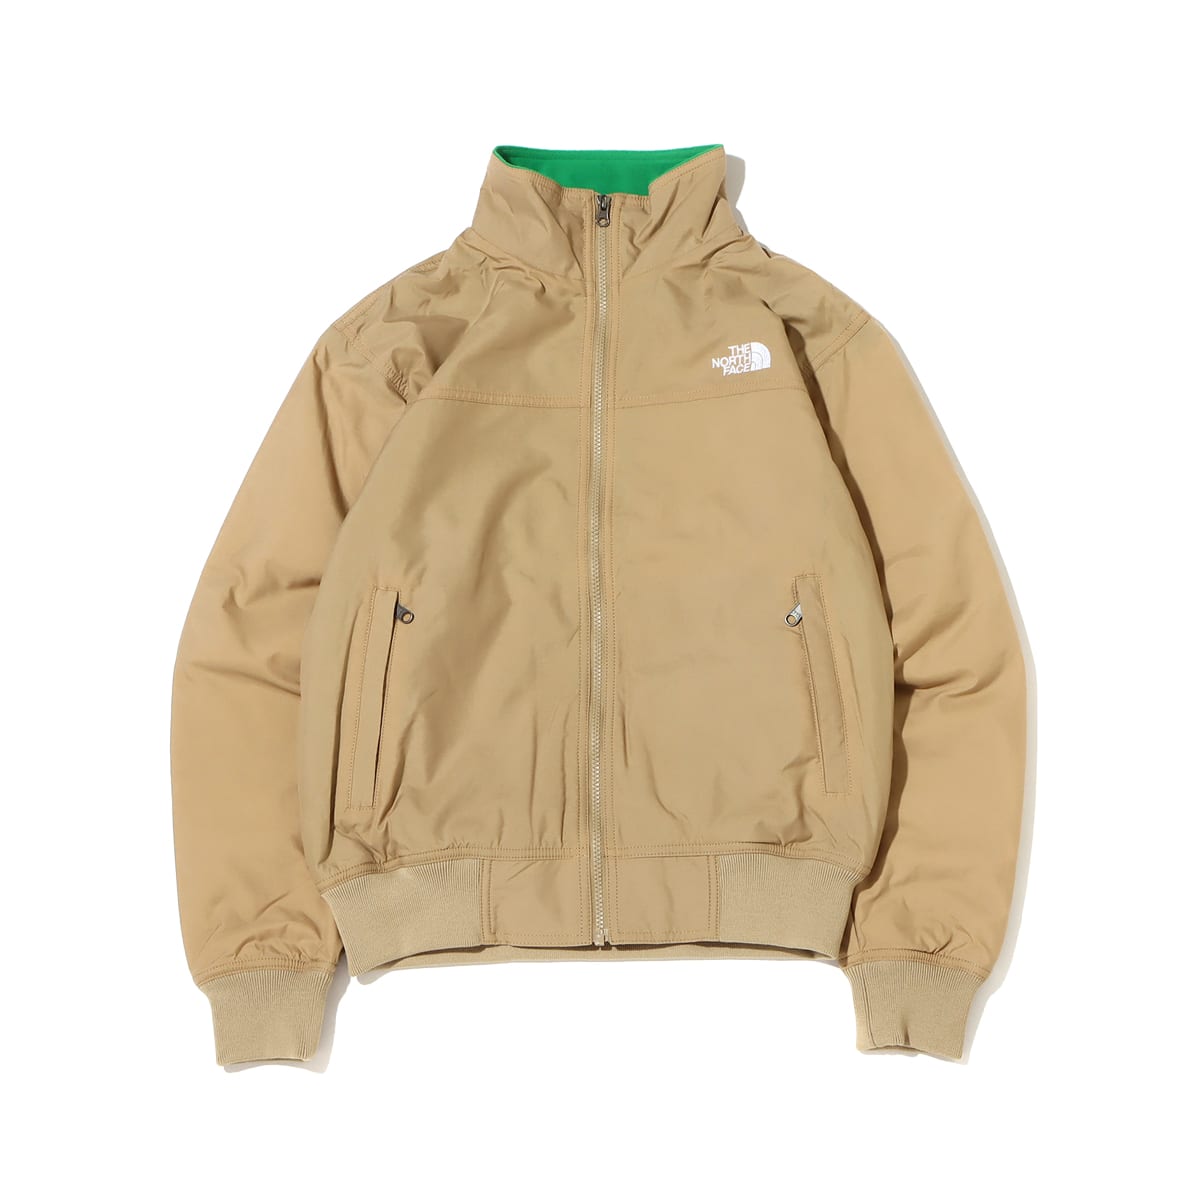 the north face jacket ケルプタン